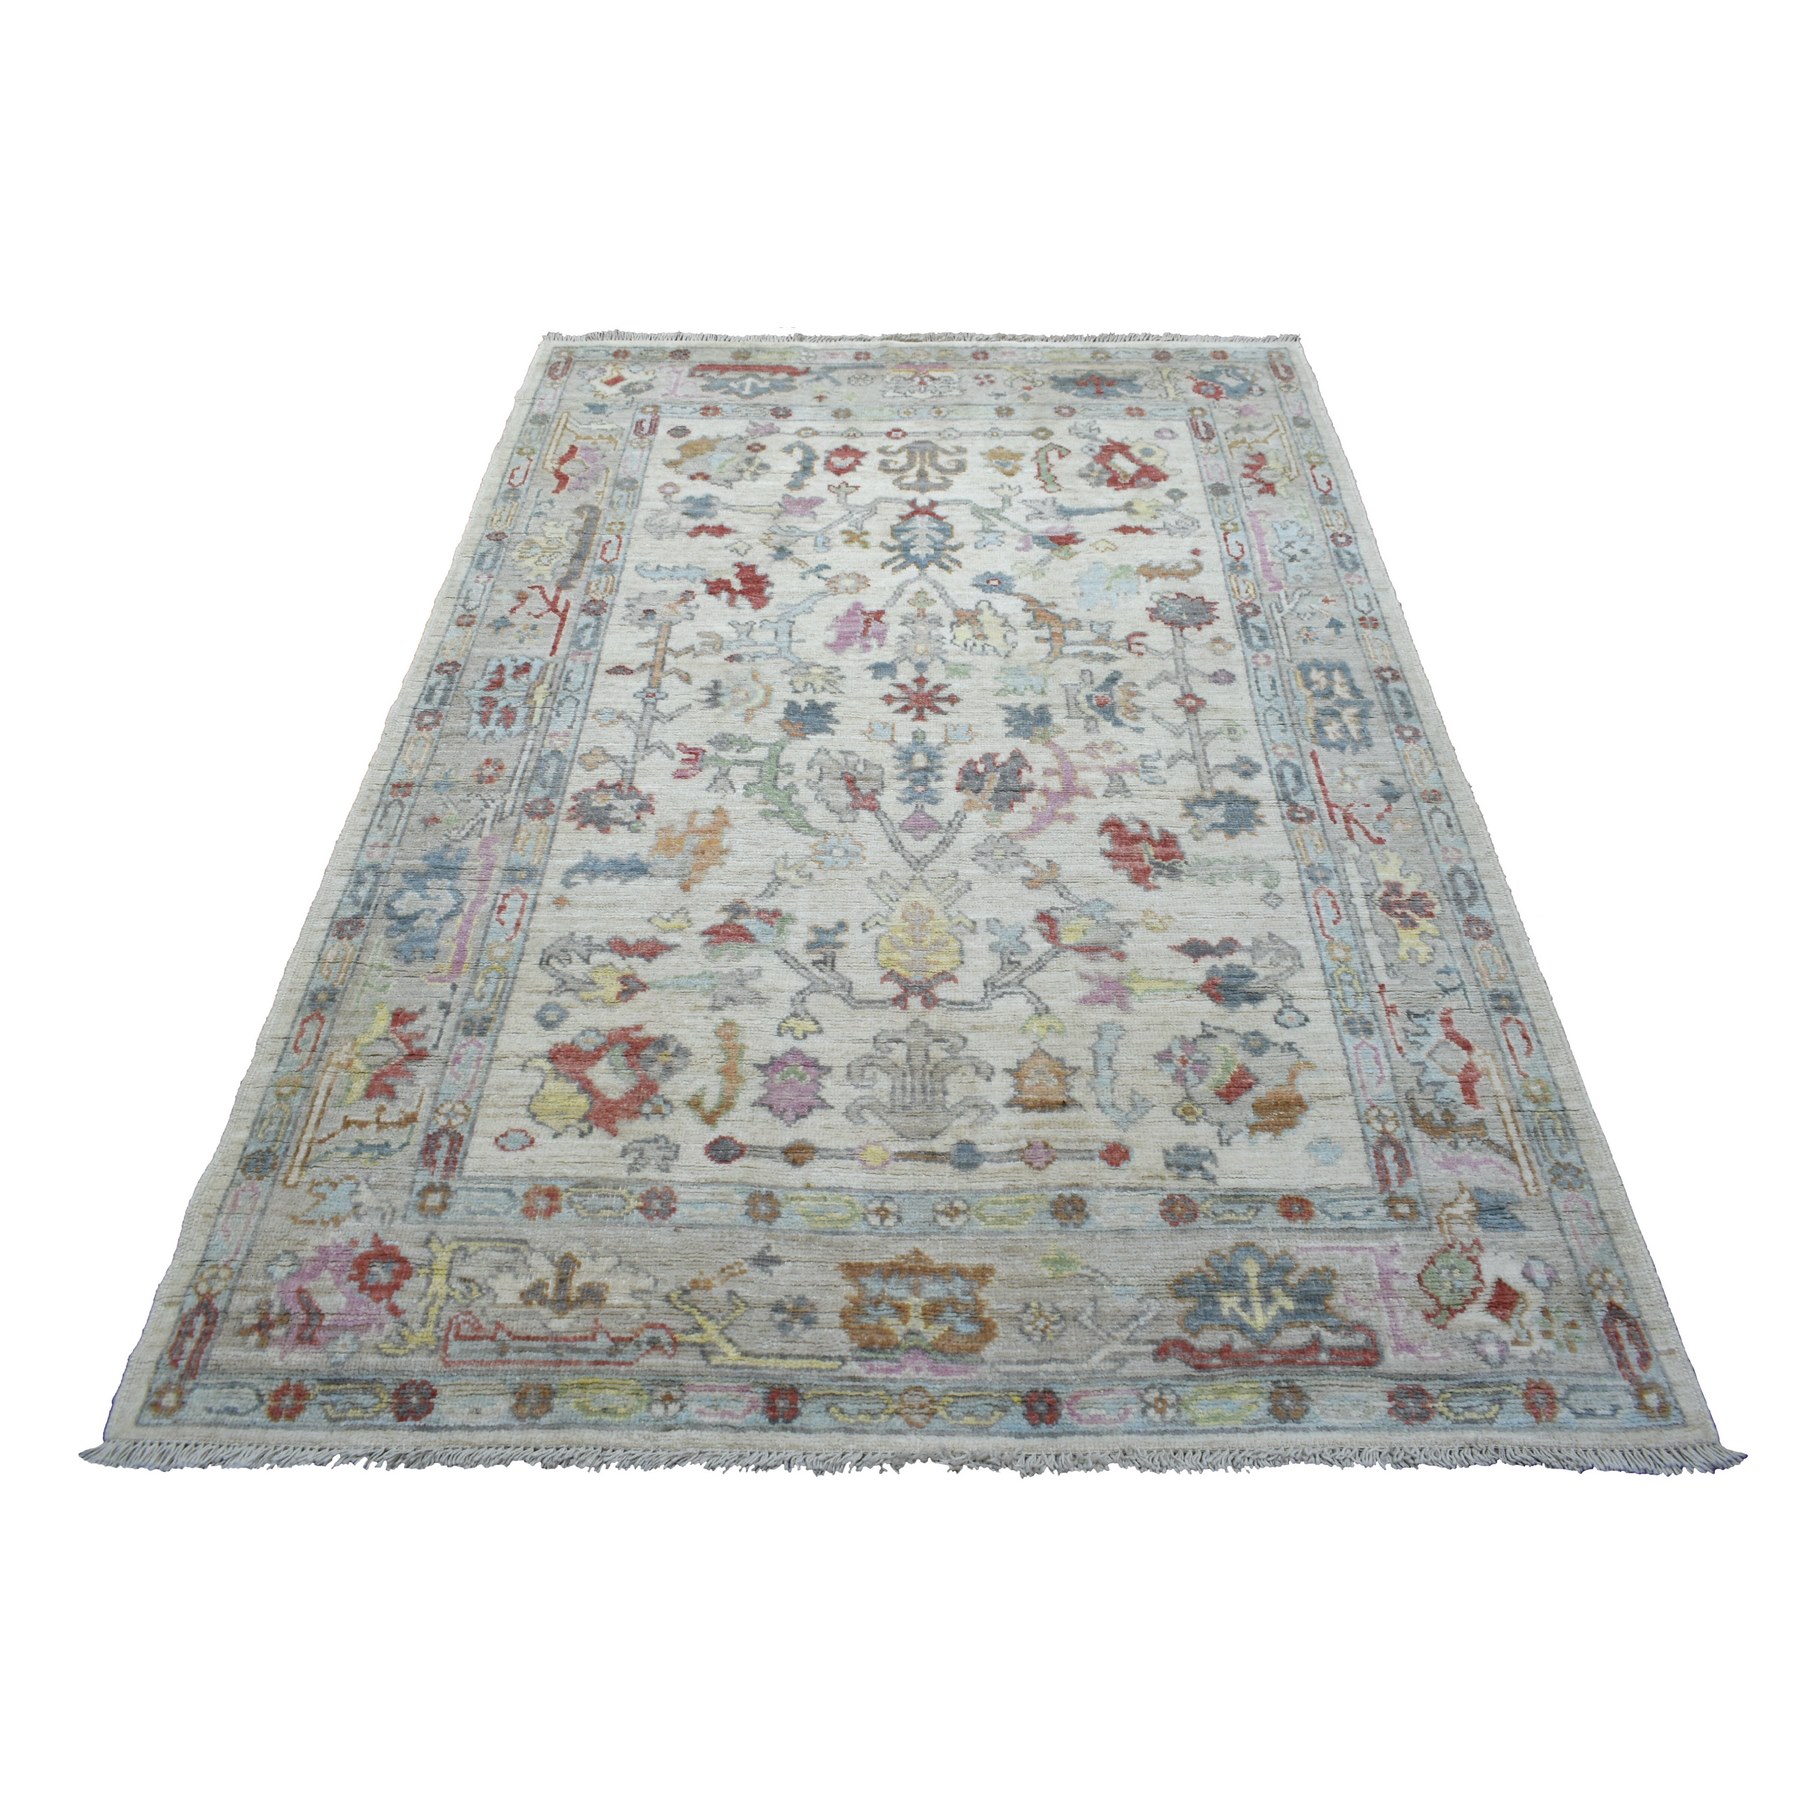 5'x7'1" Ivory Hand Woven, Afghan Angora Oushak with Colorful Floral Pattern, Soft and Shiny Wool Oriental Rug 